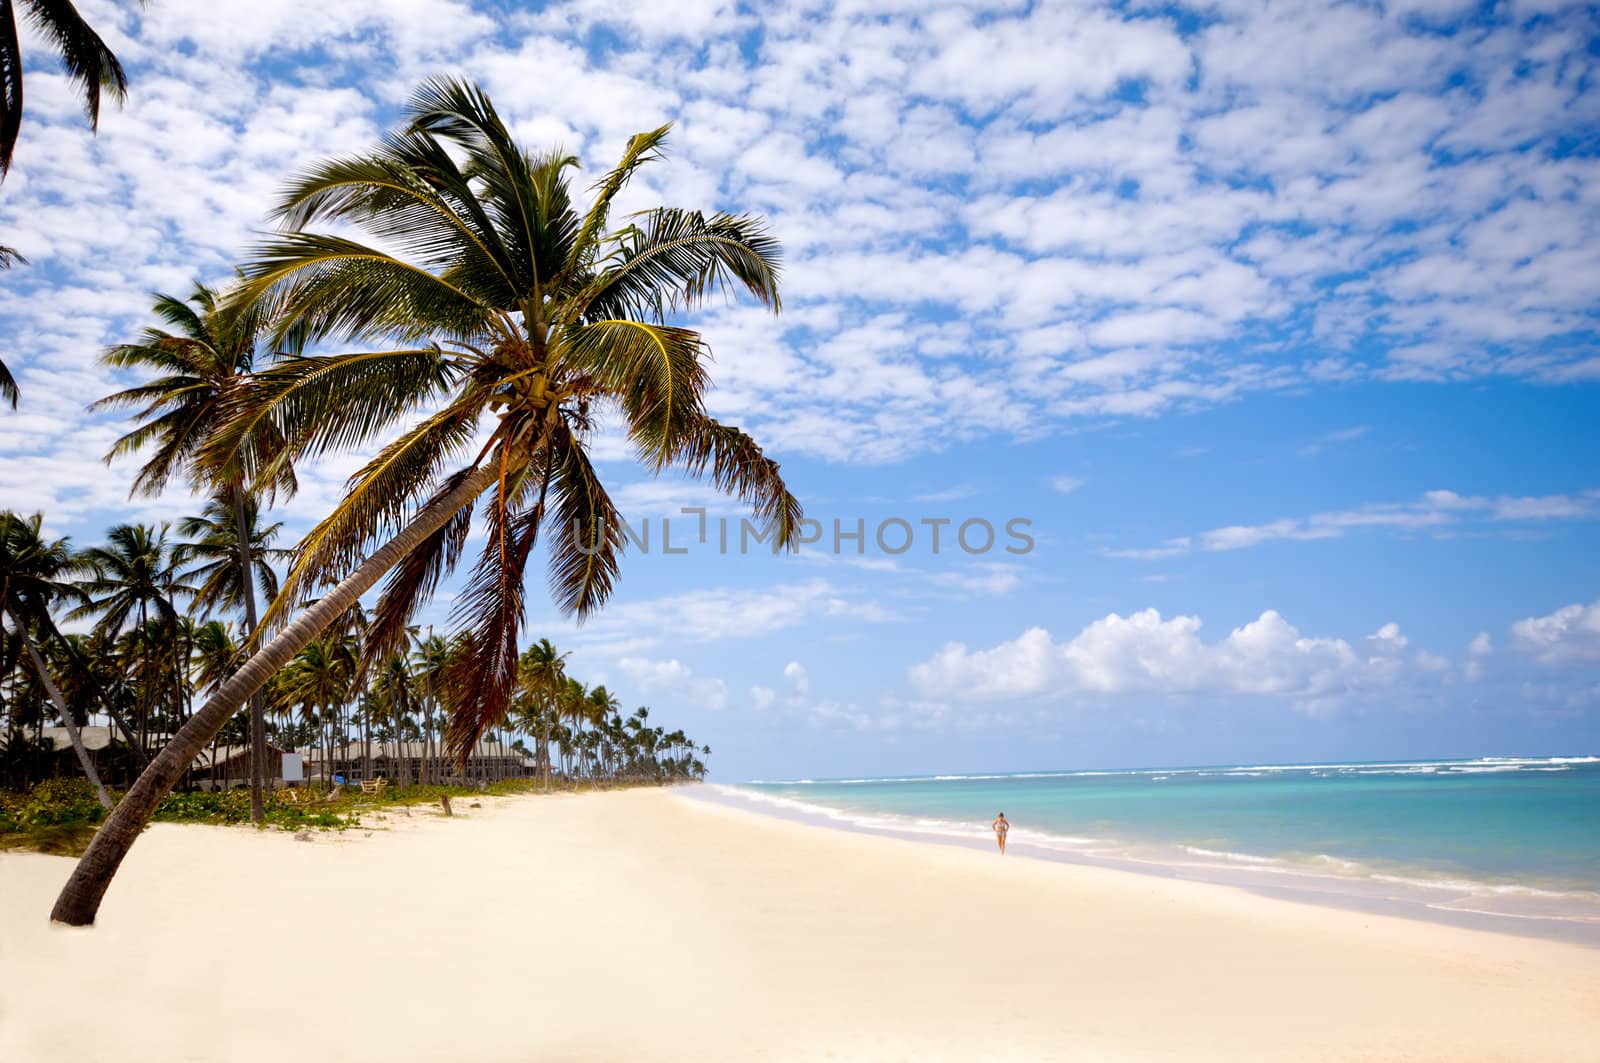 Palm hanging over tropical Caribbean beach with the coast in the background. Dominican Republic, Punta Cana.